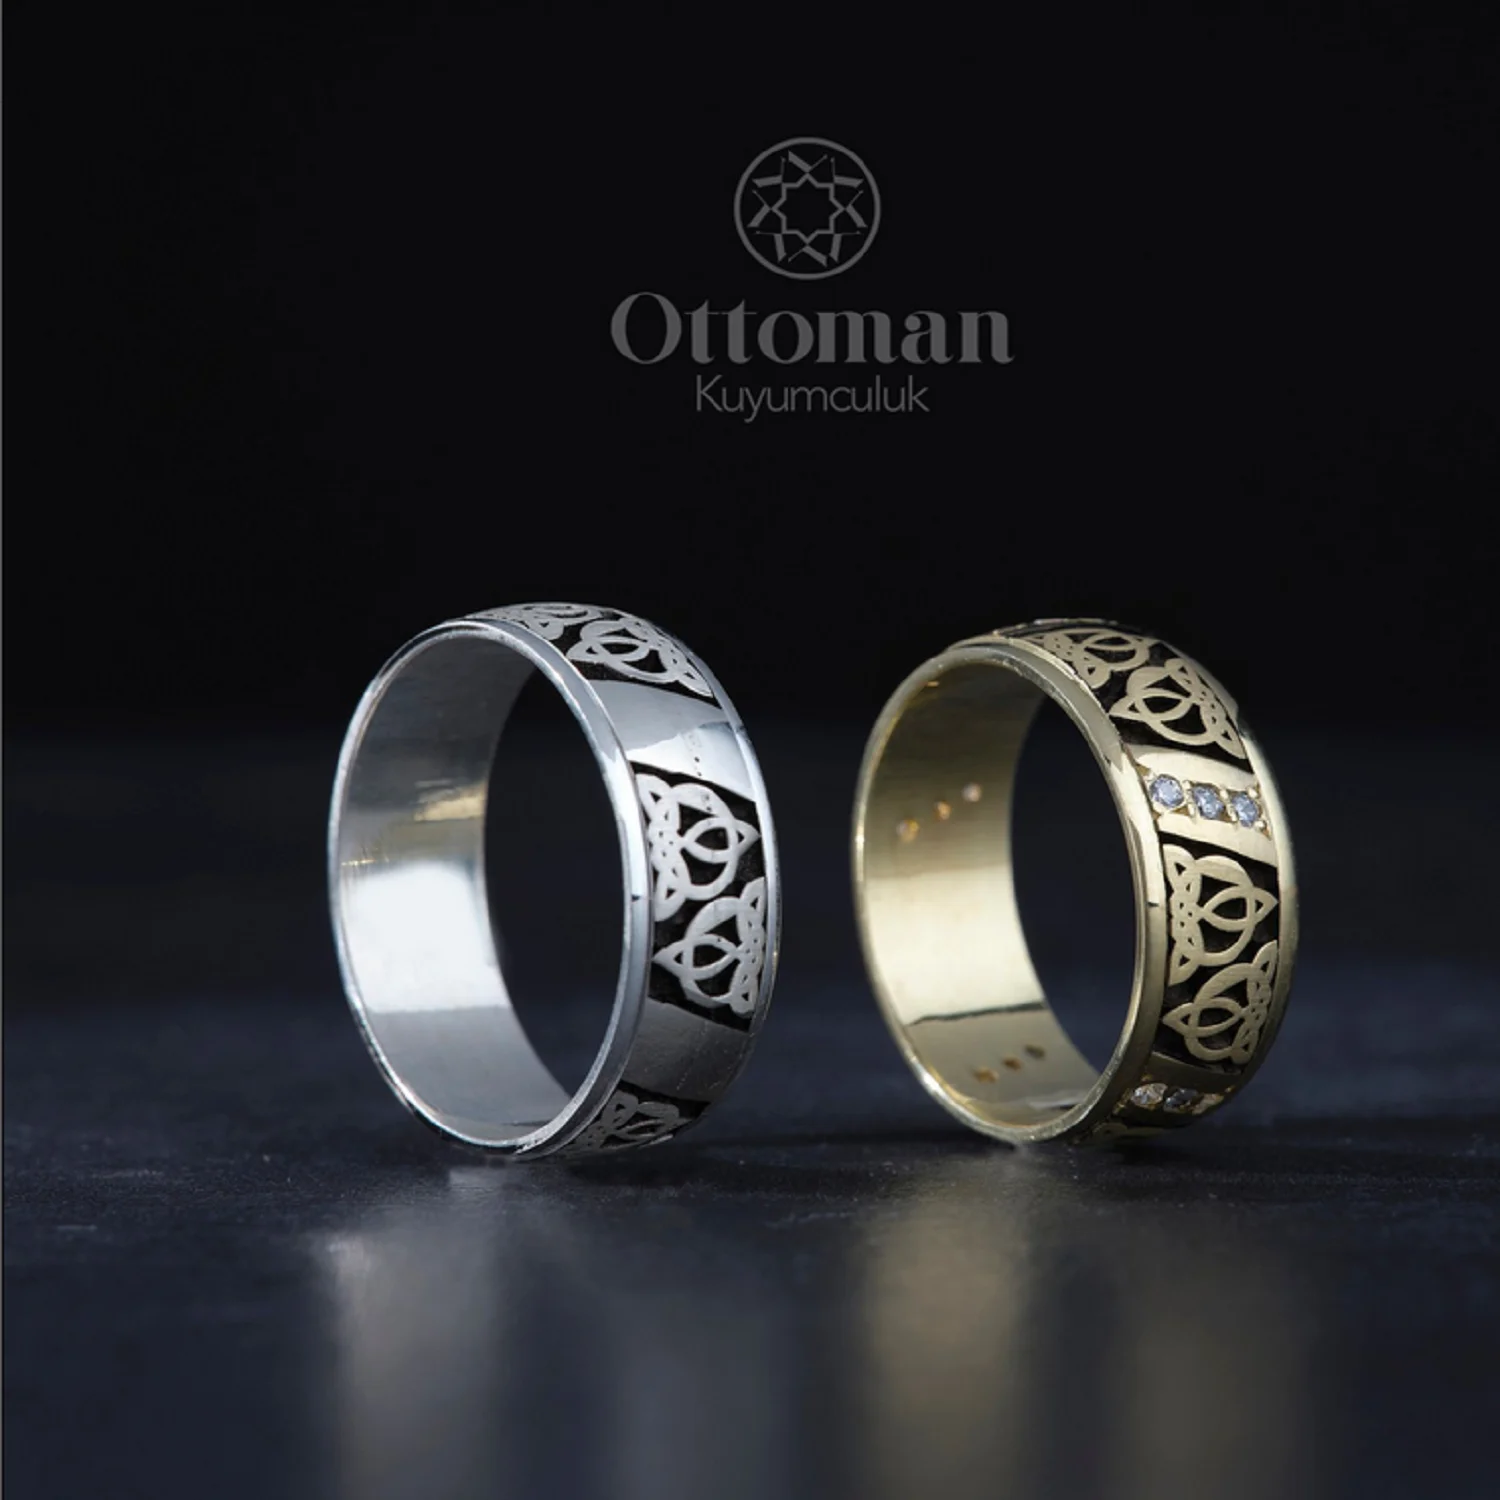 Ottoman Silver Men's and Women's Wedding and Engagement Rings are Handcrafted in Turkey and Embellished with White Zircon Stones